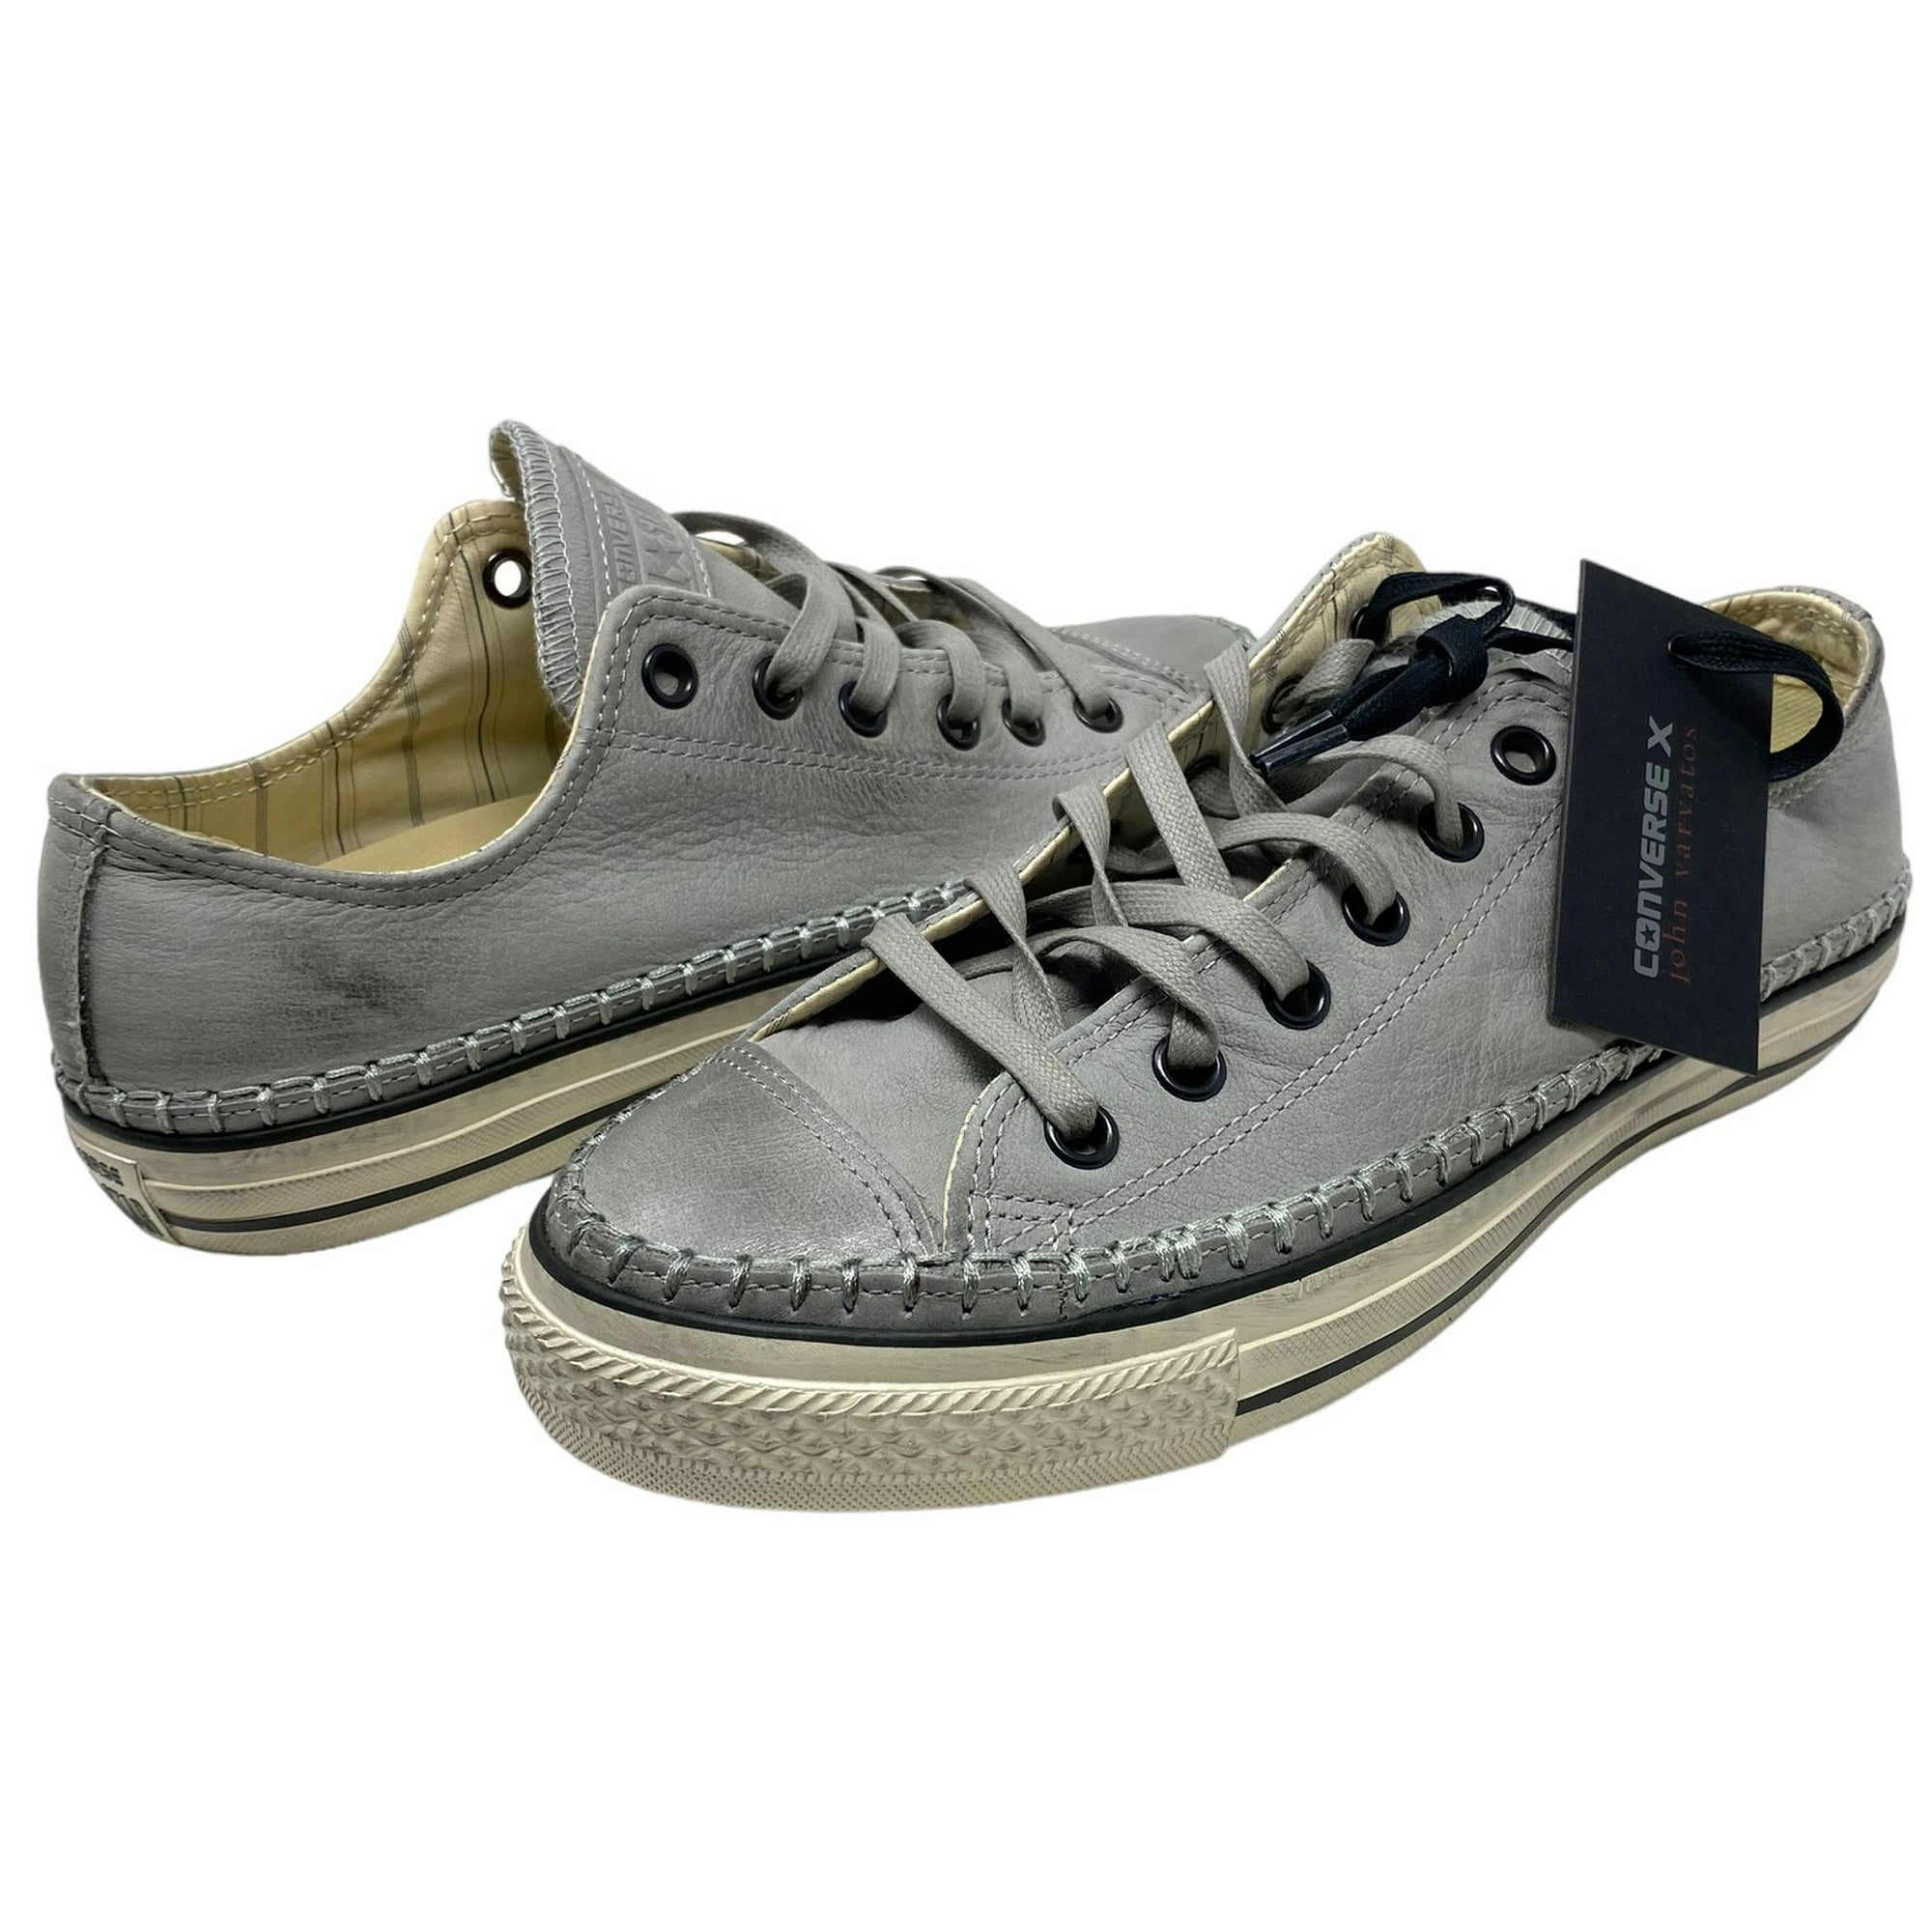 X John Varvatos Limited Edition Leather Low Top Sneaker Shoes in Ox Sand (Men 5.5/Women 7.5) - Walmart.com